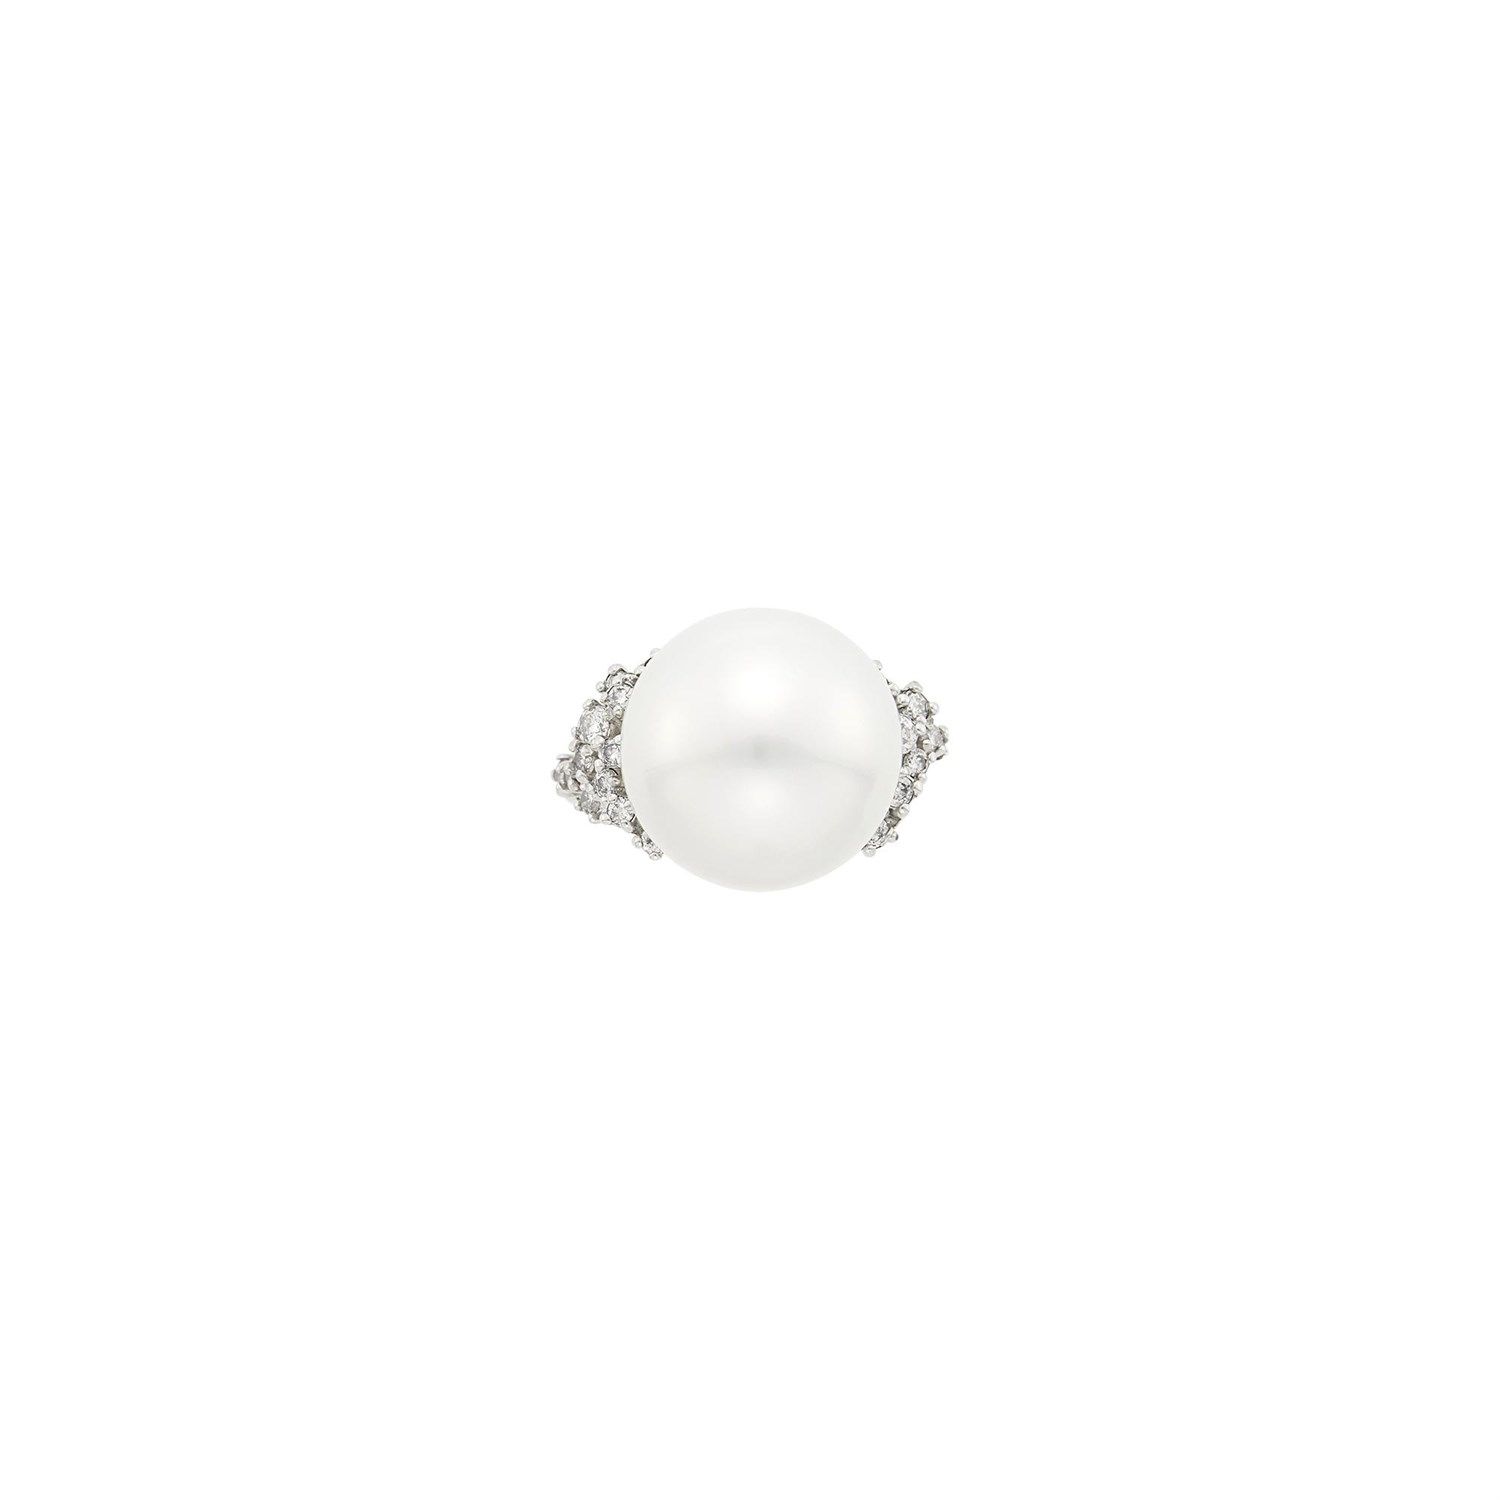 Lot 40 - White Gold, South Sea Cultured Pearl and Diamond Ring